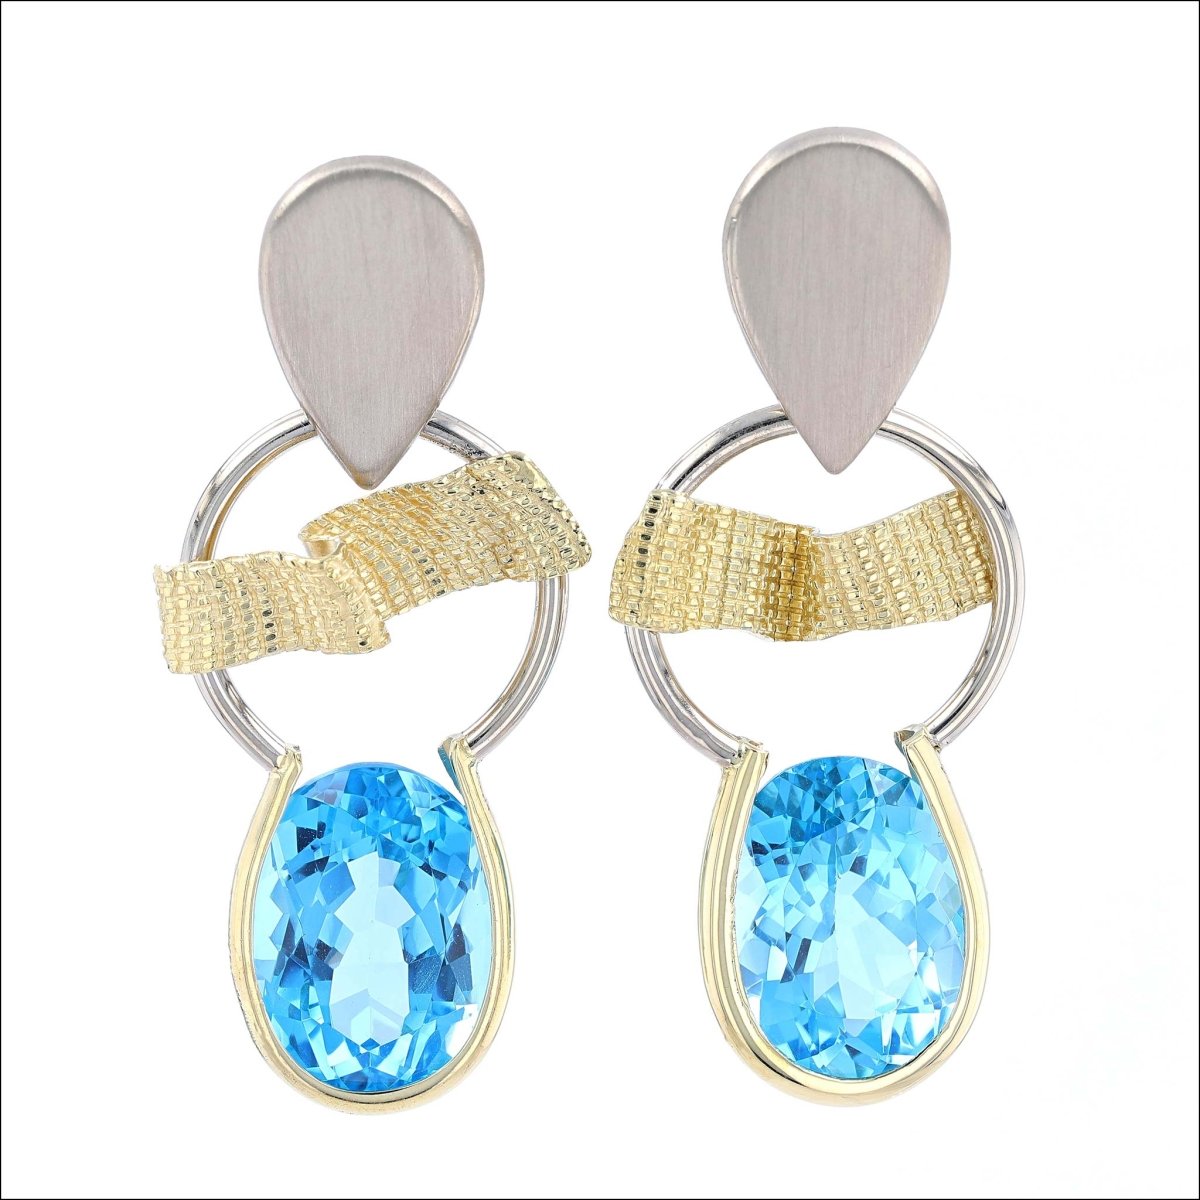 Blue Topaz Textured Swing Earrings 18KY 14KW (Consignment) - JewelsmithEarrings